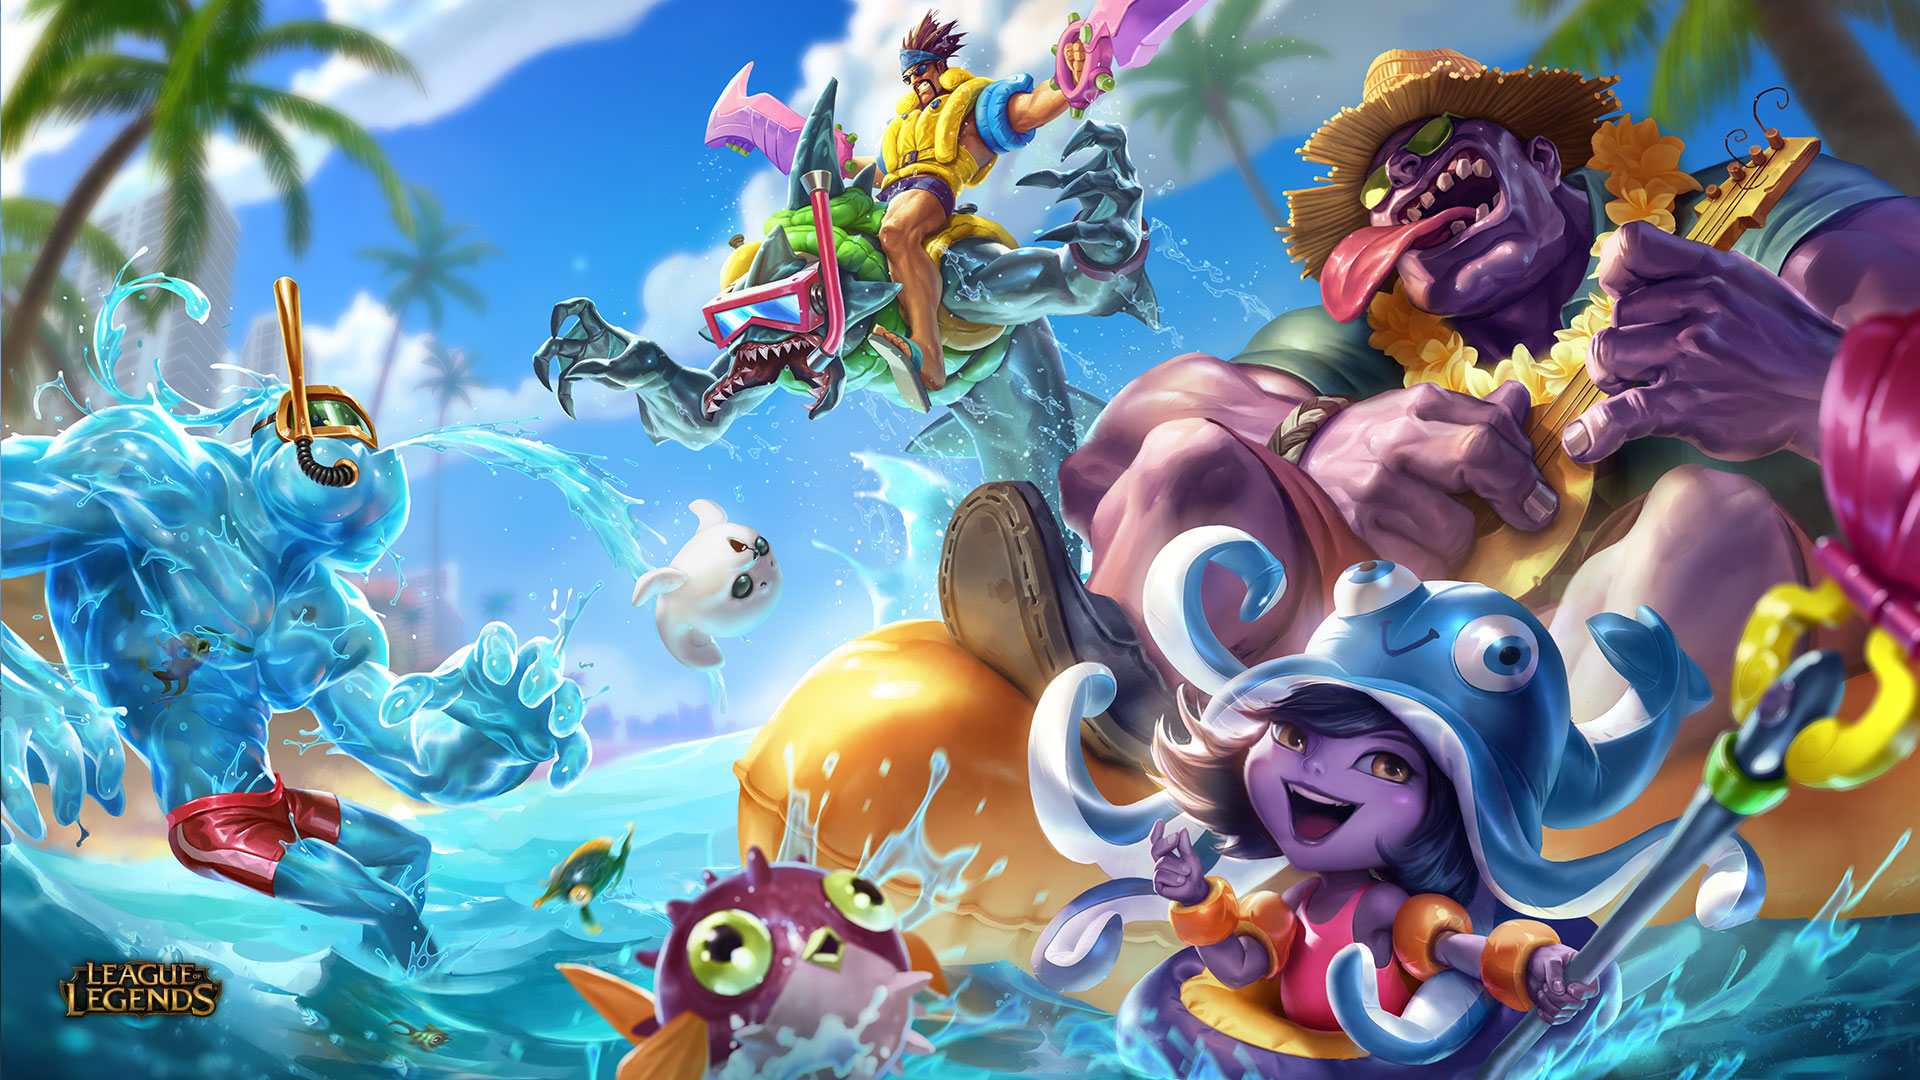 2015 Pool Party Skins Hd Wallpaper - Pool Party League Of Legends , HD Wallpaper & Backgrounds